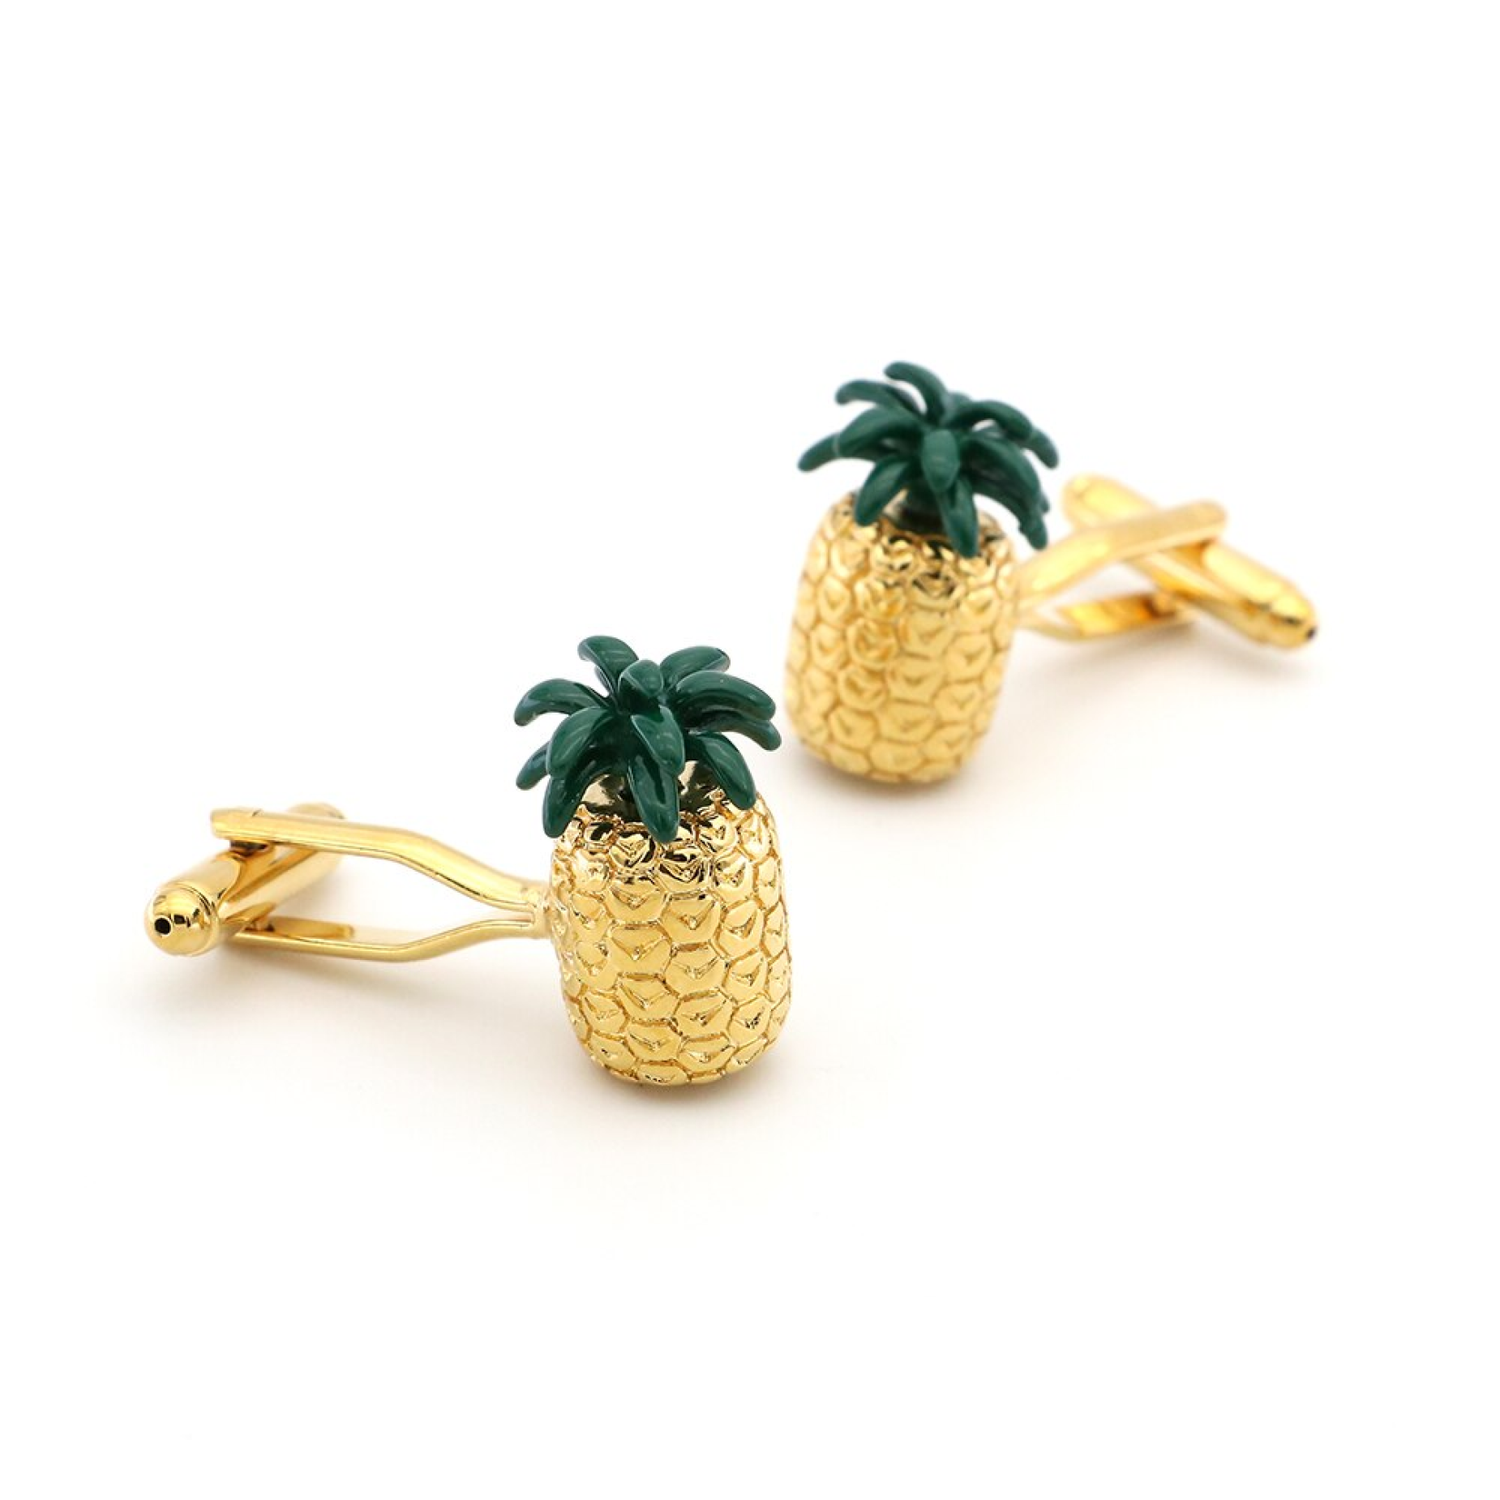 View 3: Gold and Green Colored Pineapple Cufflinks